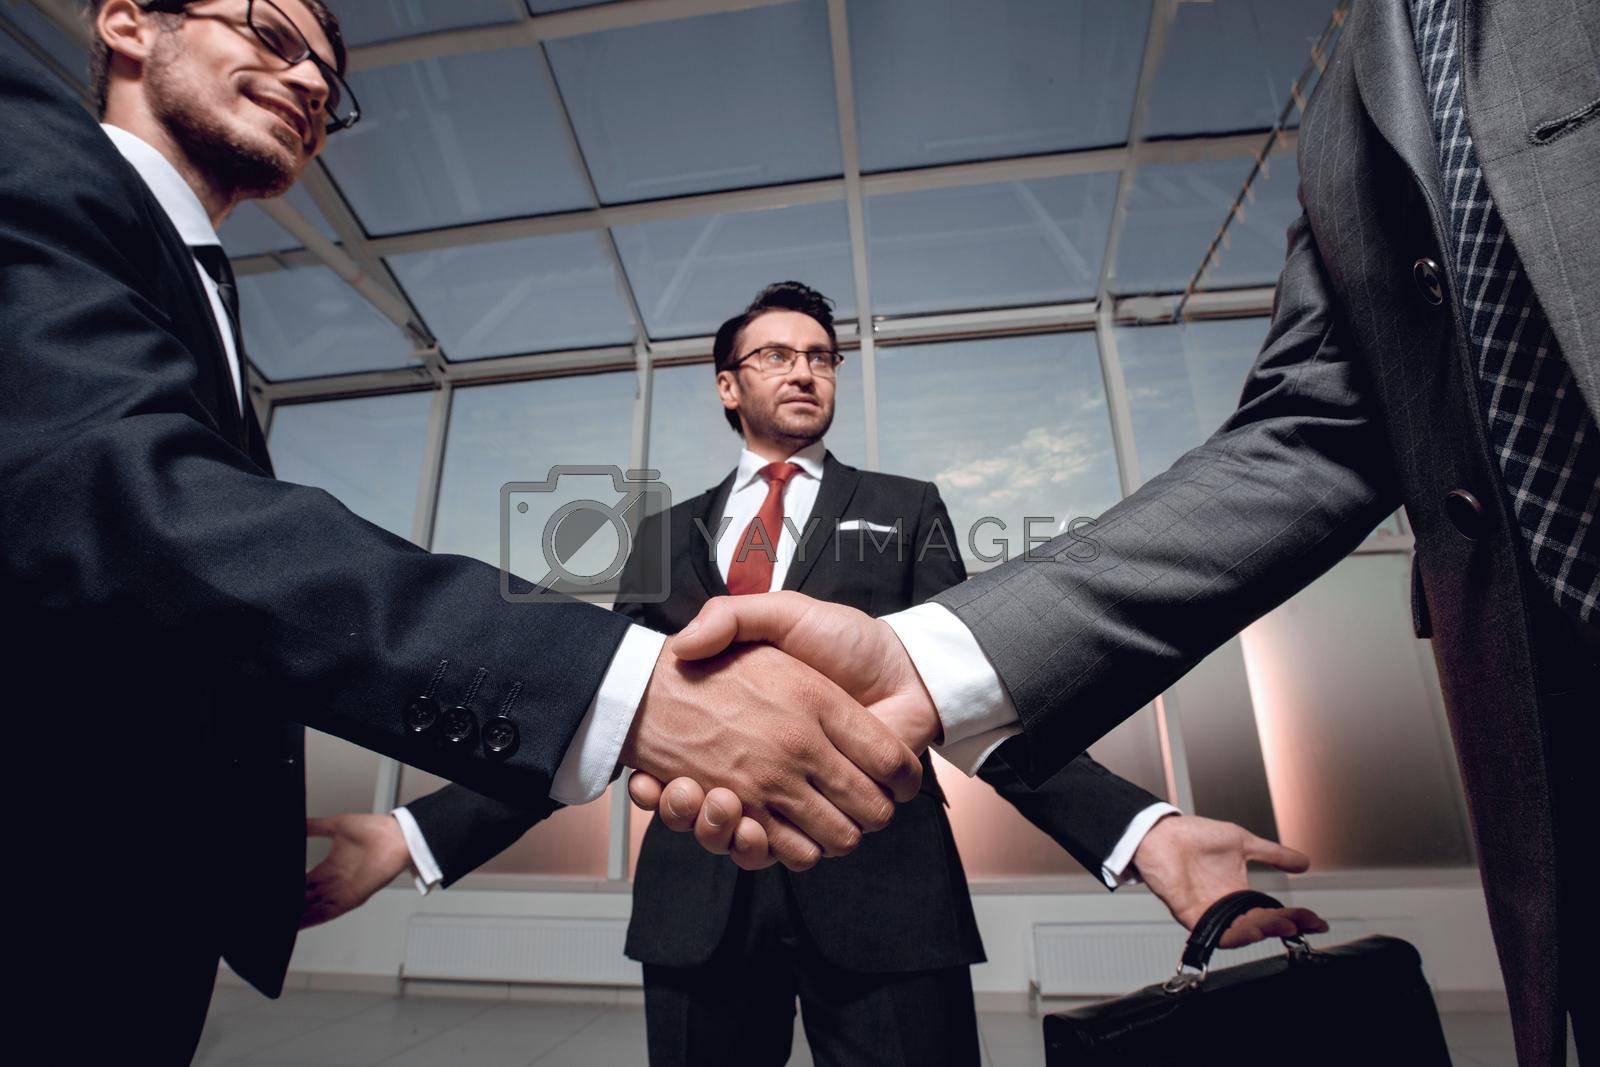 Royalty free image of business partners shake hands by asdf